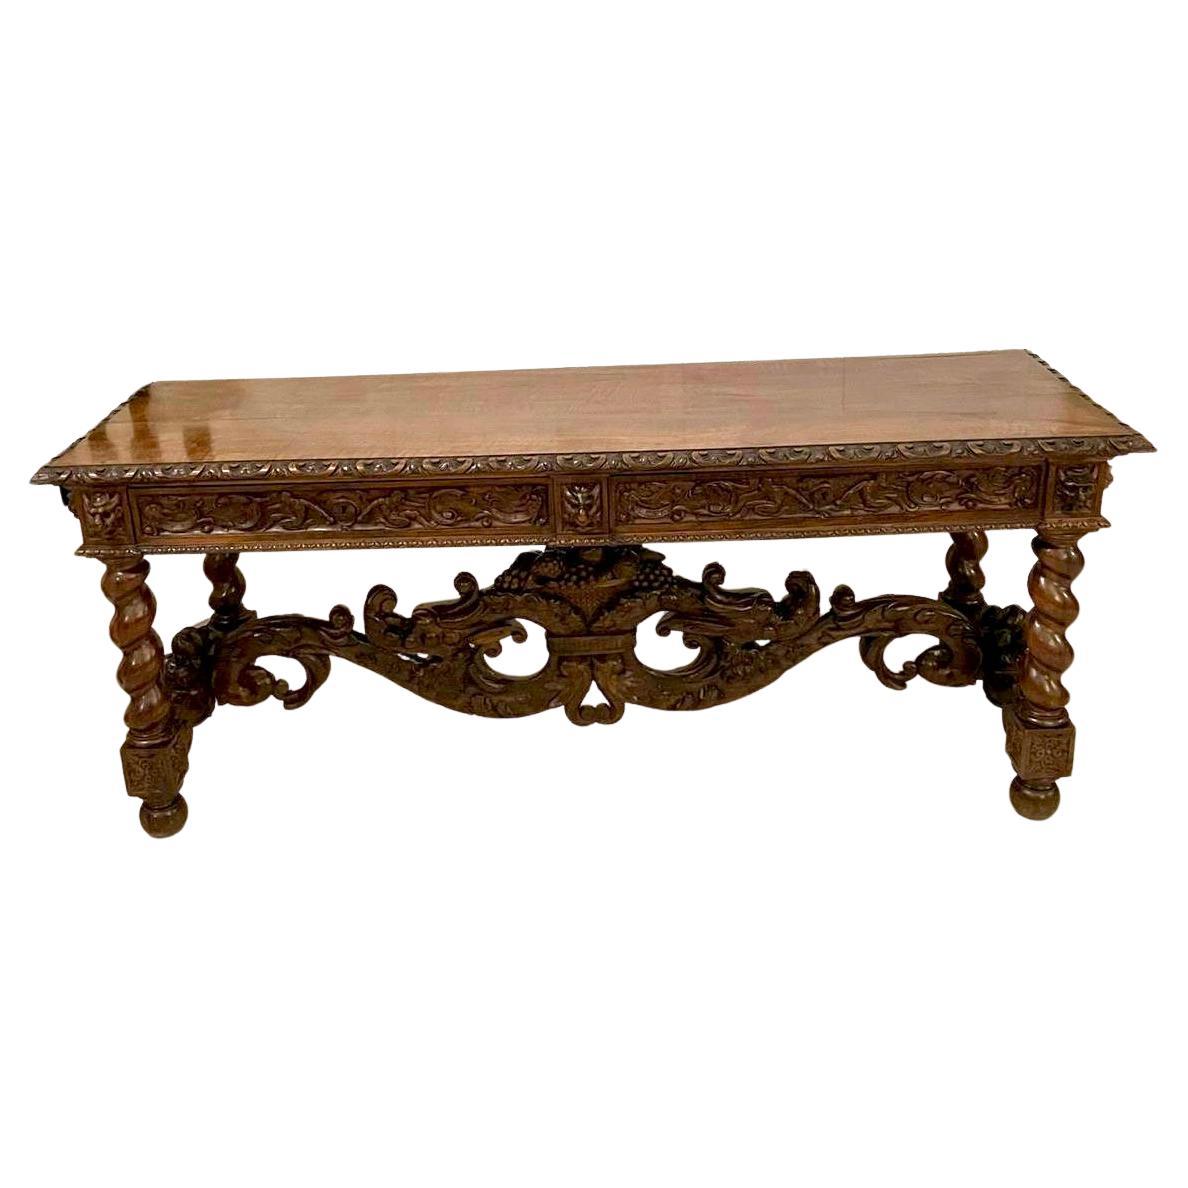 Exhibition Quality Antique Italian Carved Solid Walnut Serving/Console Table